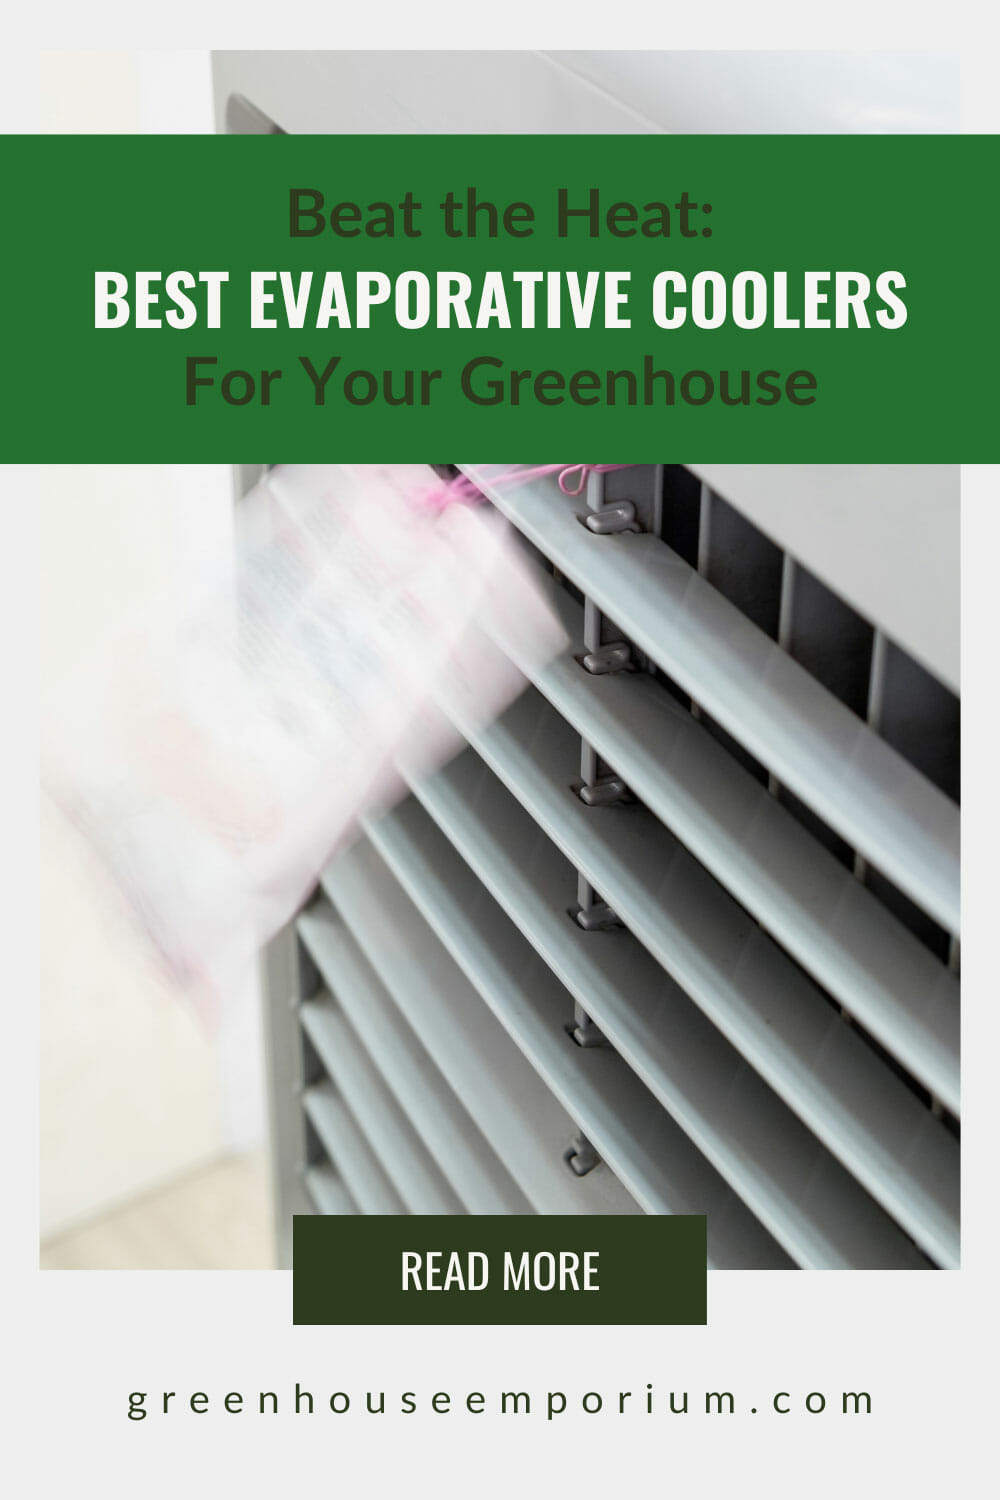 Evaporative cooler blowing out air with the text: Beat the Heat - Best Evaporative Coolers For Your Greenhouse